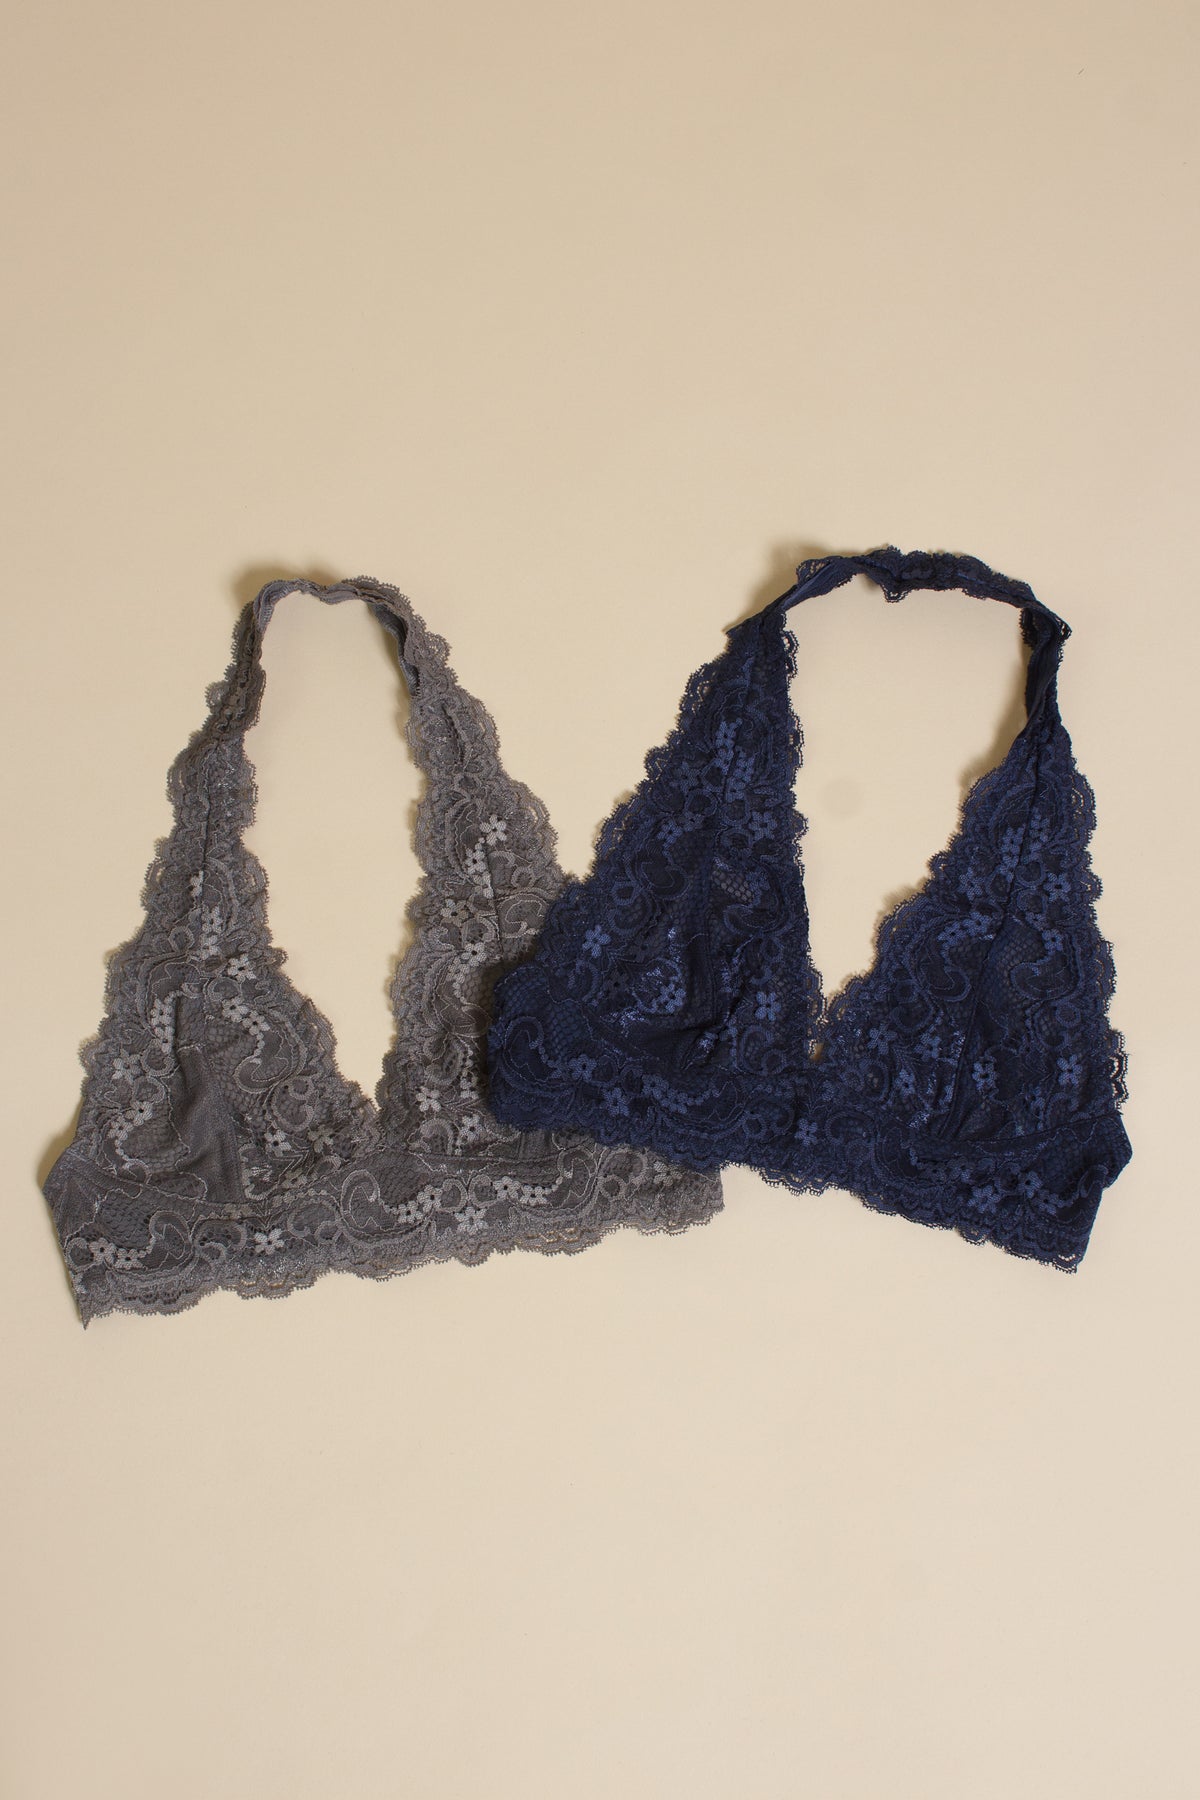 Wishlist lace halter bralette flatlay, in assorted colors.